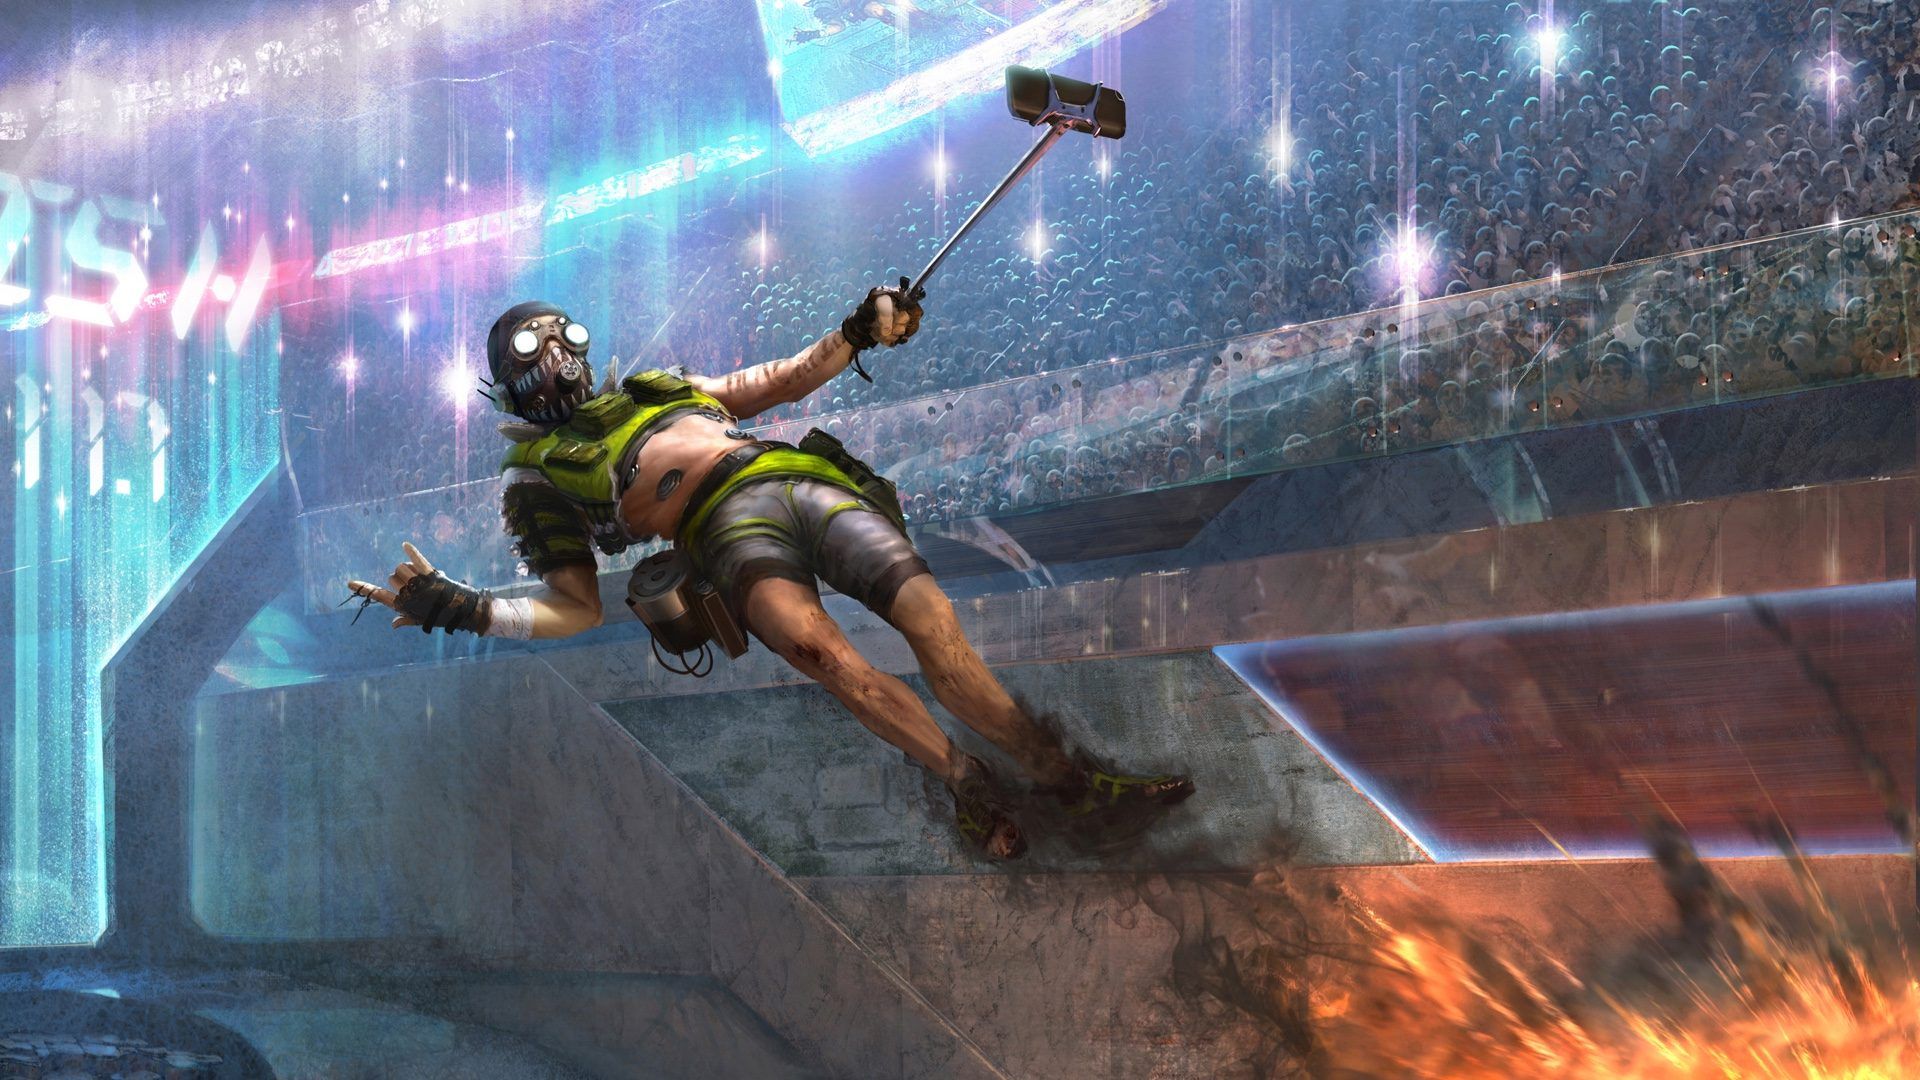 The Apex Legends community is divided over a controversial data mining practice that provides an unfair advantage